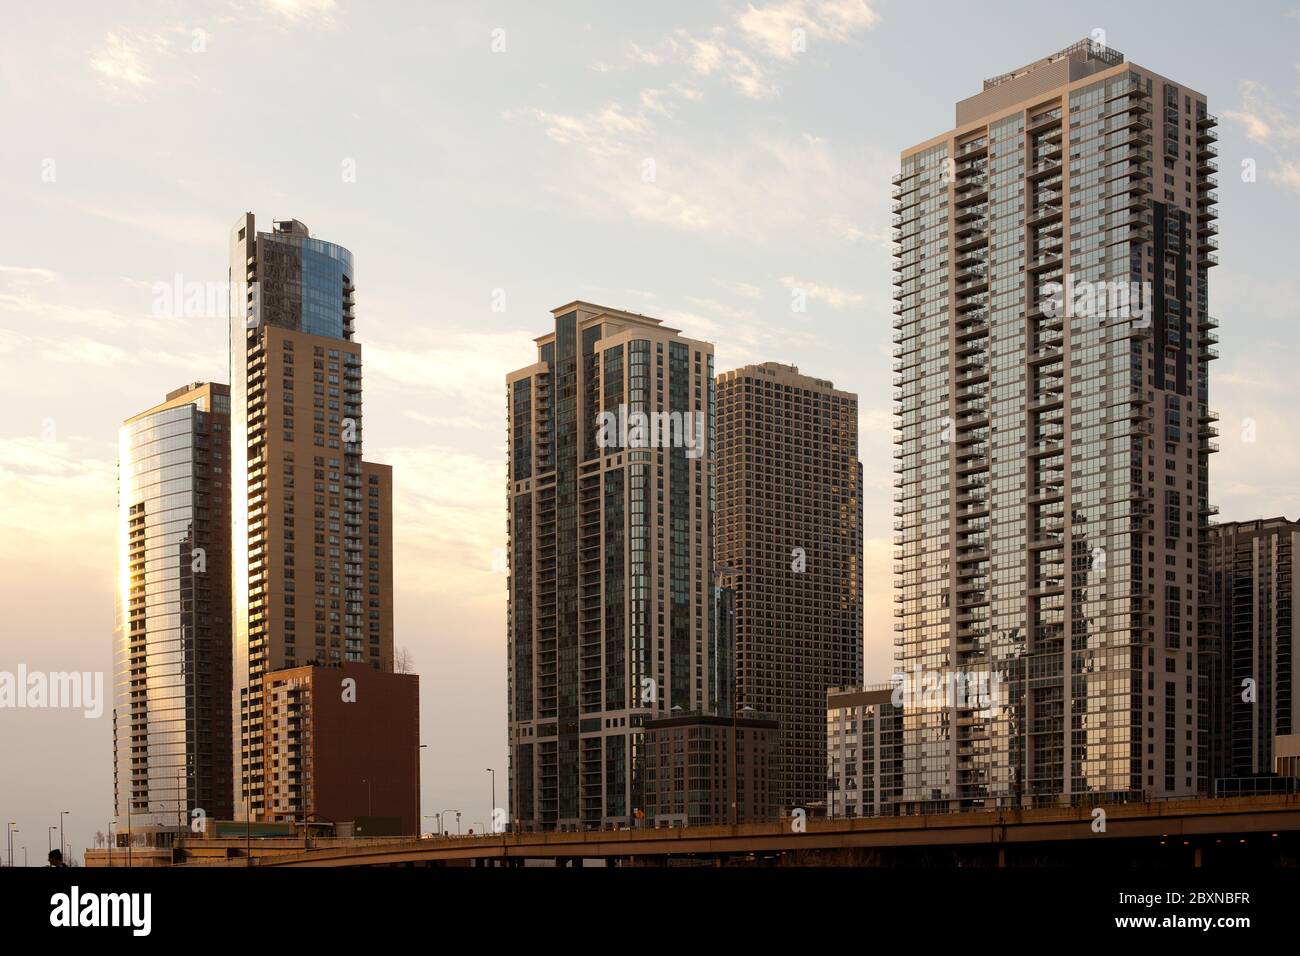 Skyline of buildings at Chicago river shore, Chicago, Illinois, United States Stock Photo